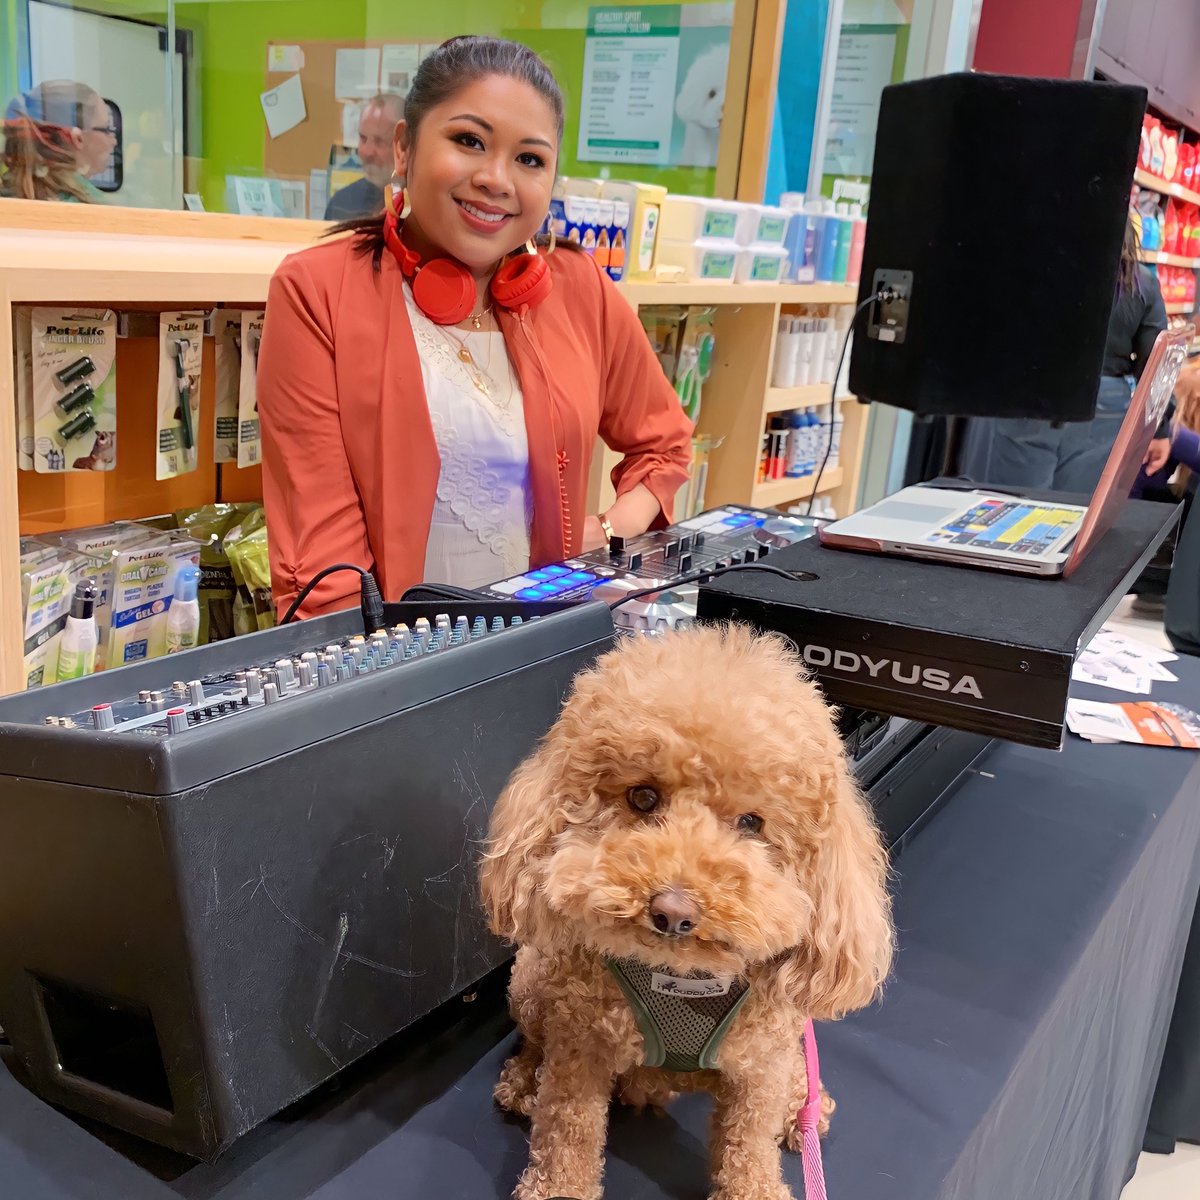 DJing for dogs— the perfect client DOES exist! 🐾😍🐶 @healthyspot